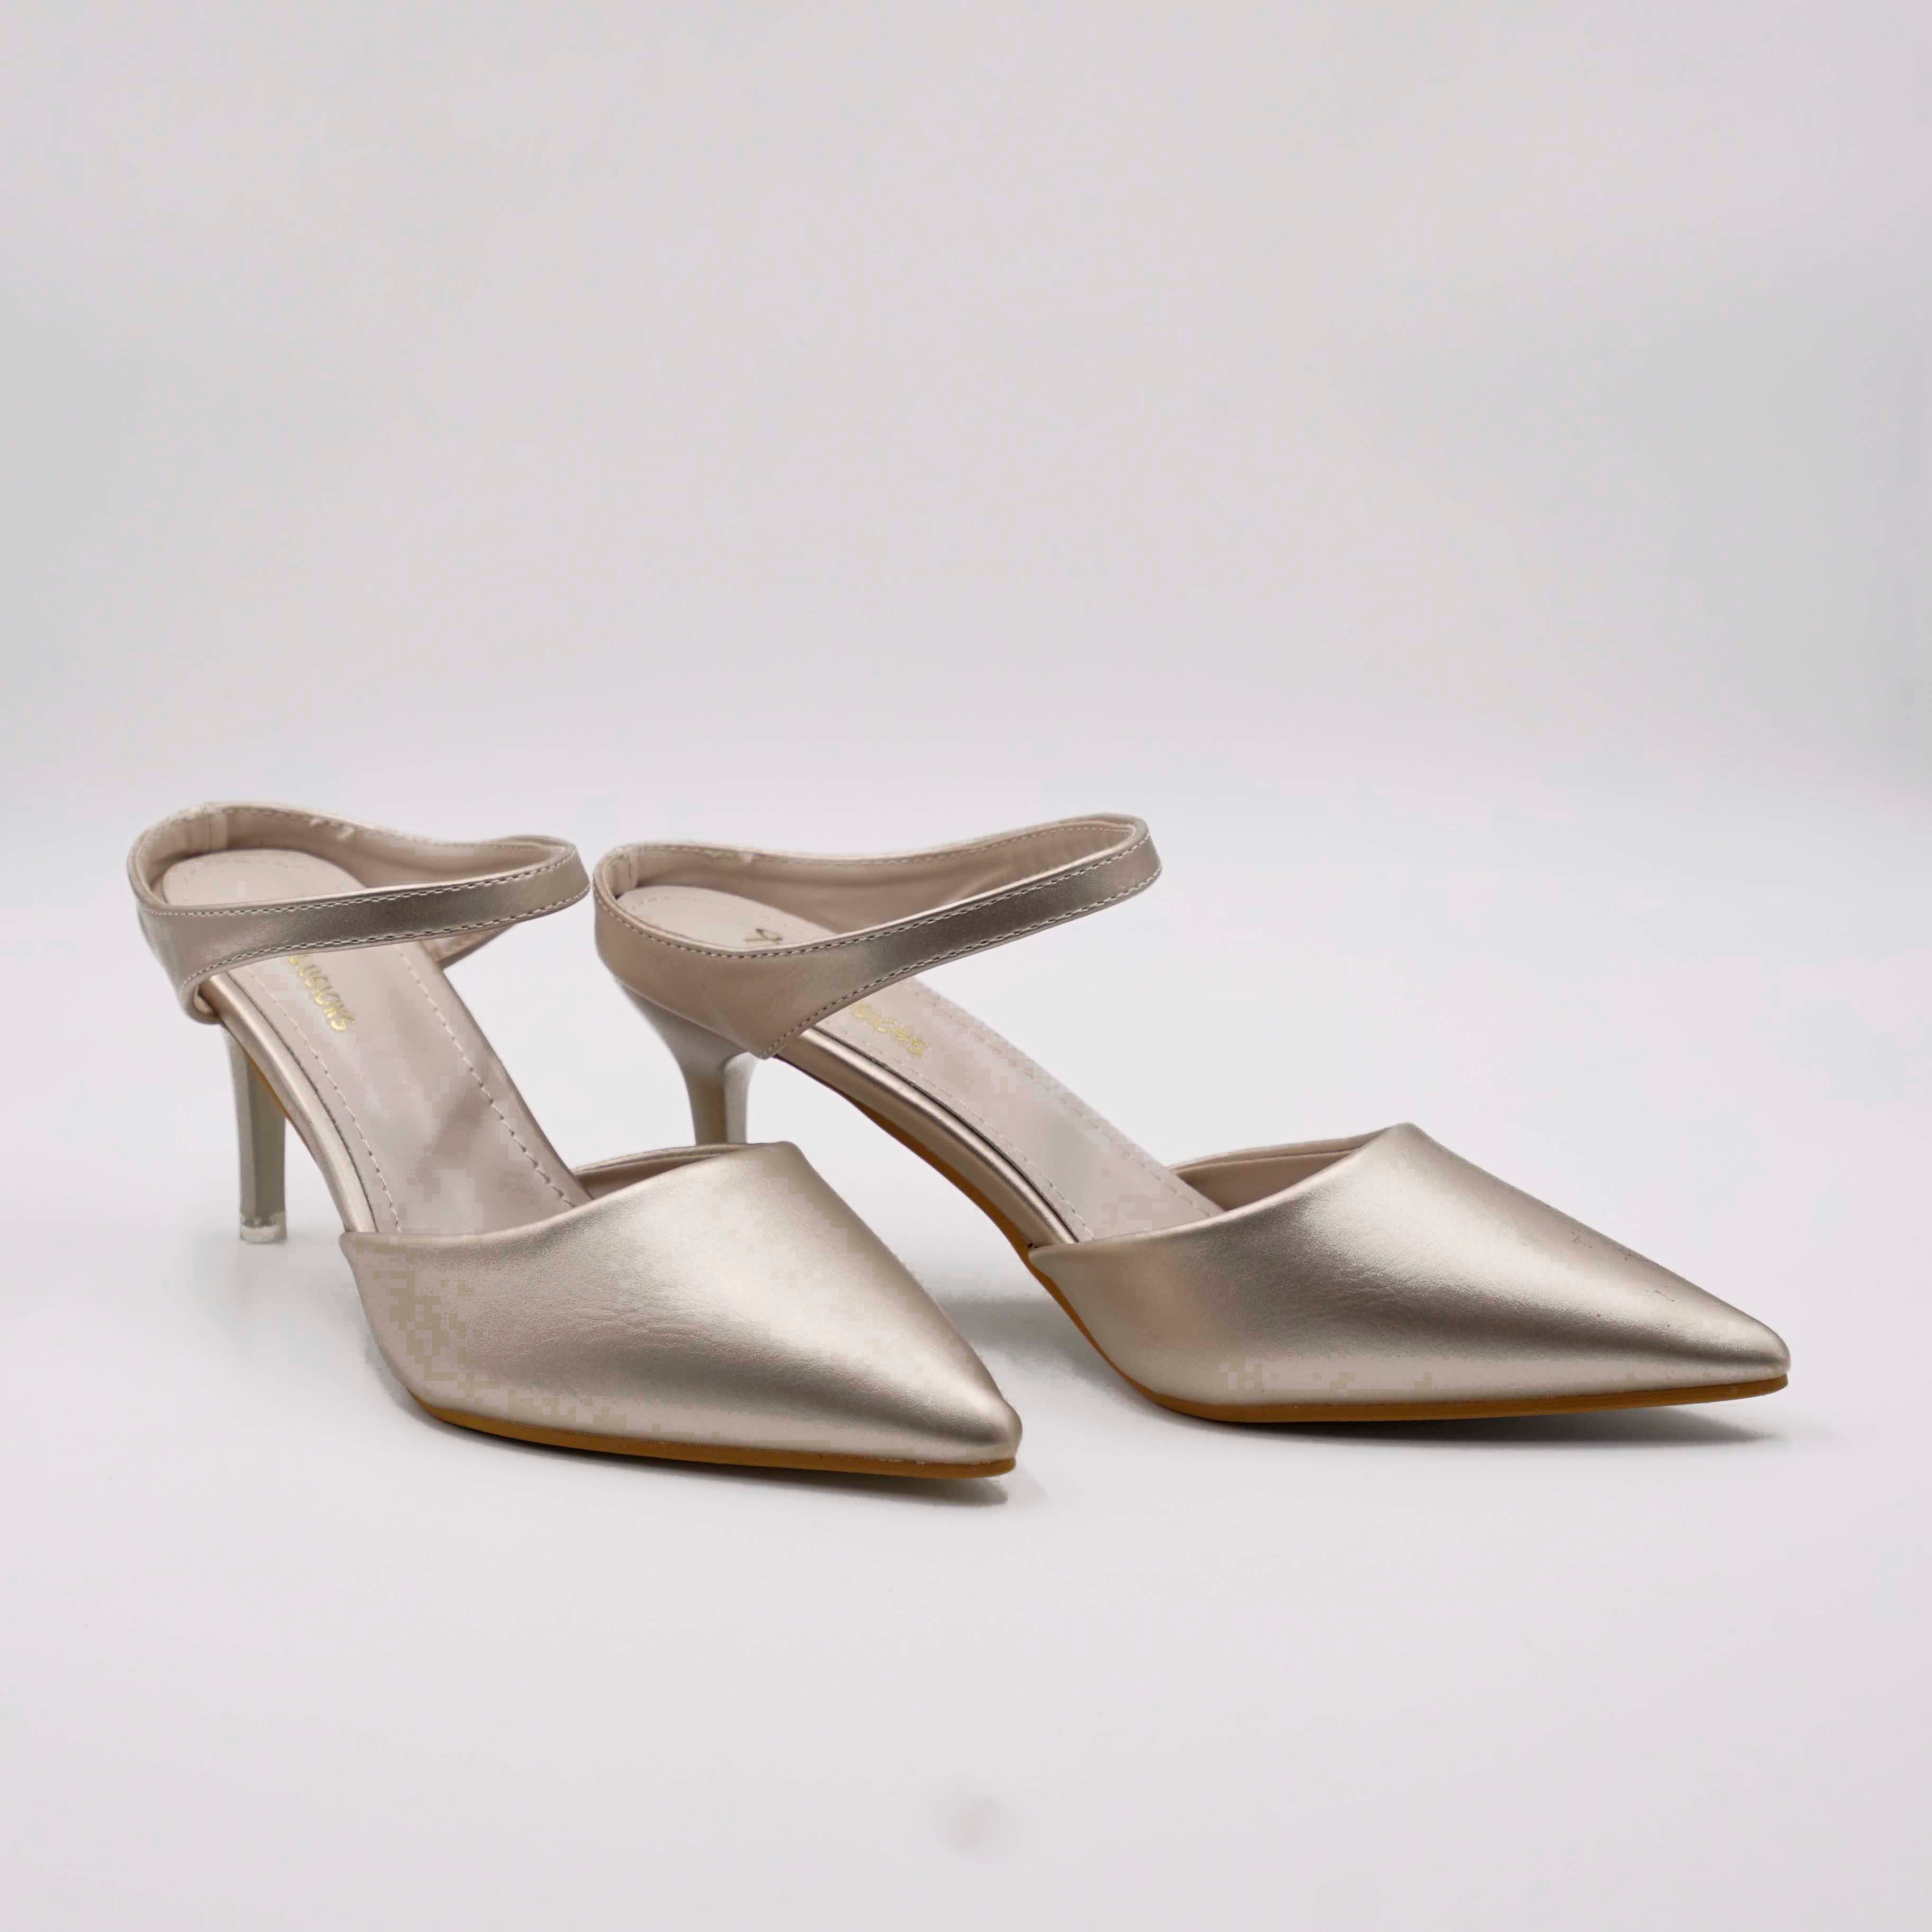 Kate Middleton's New Look Low Block Heeled Shoes in Tan